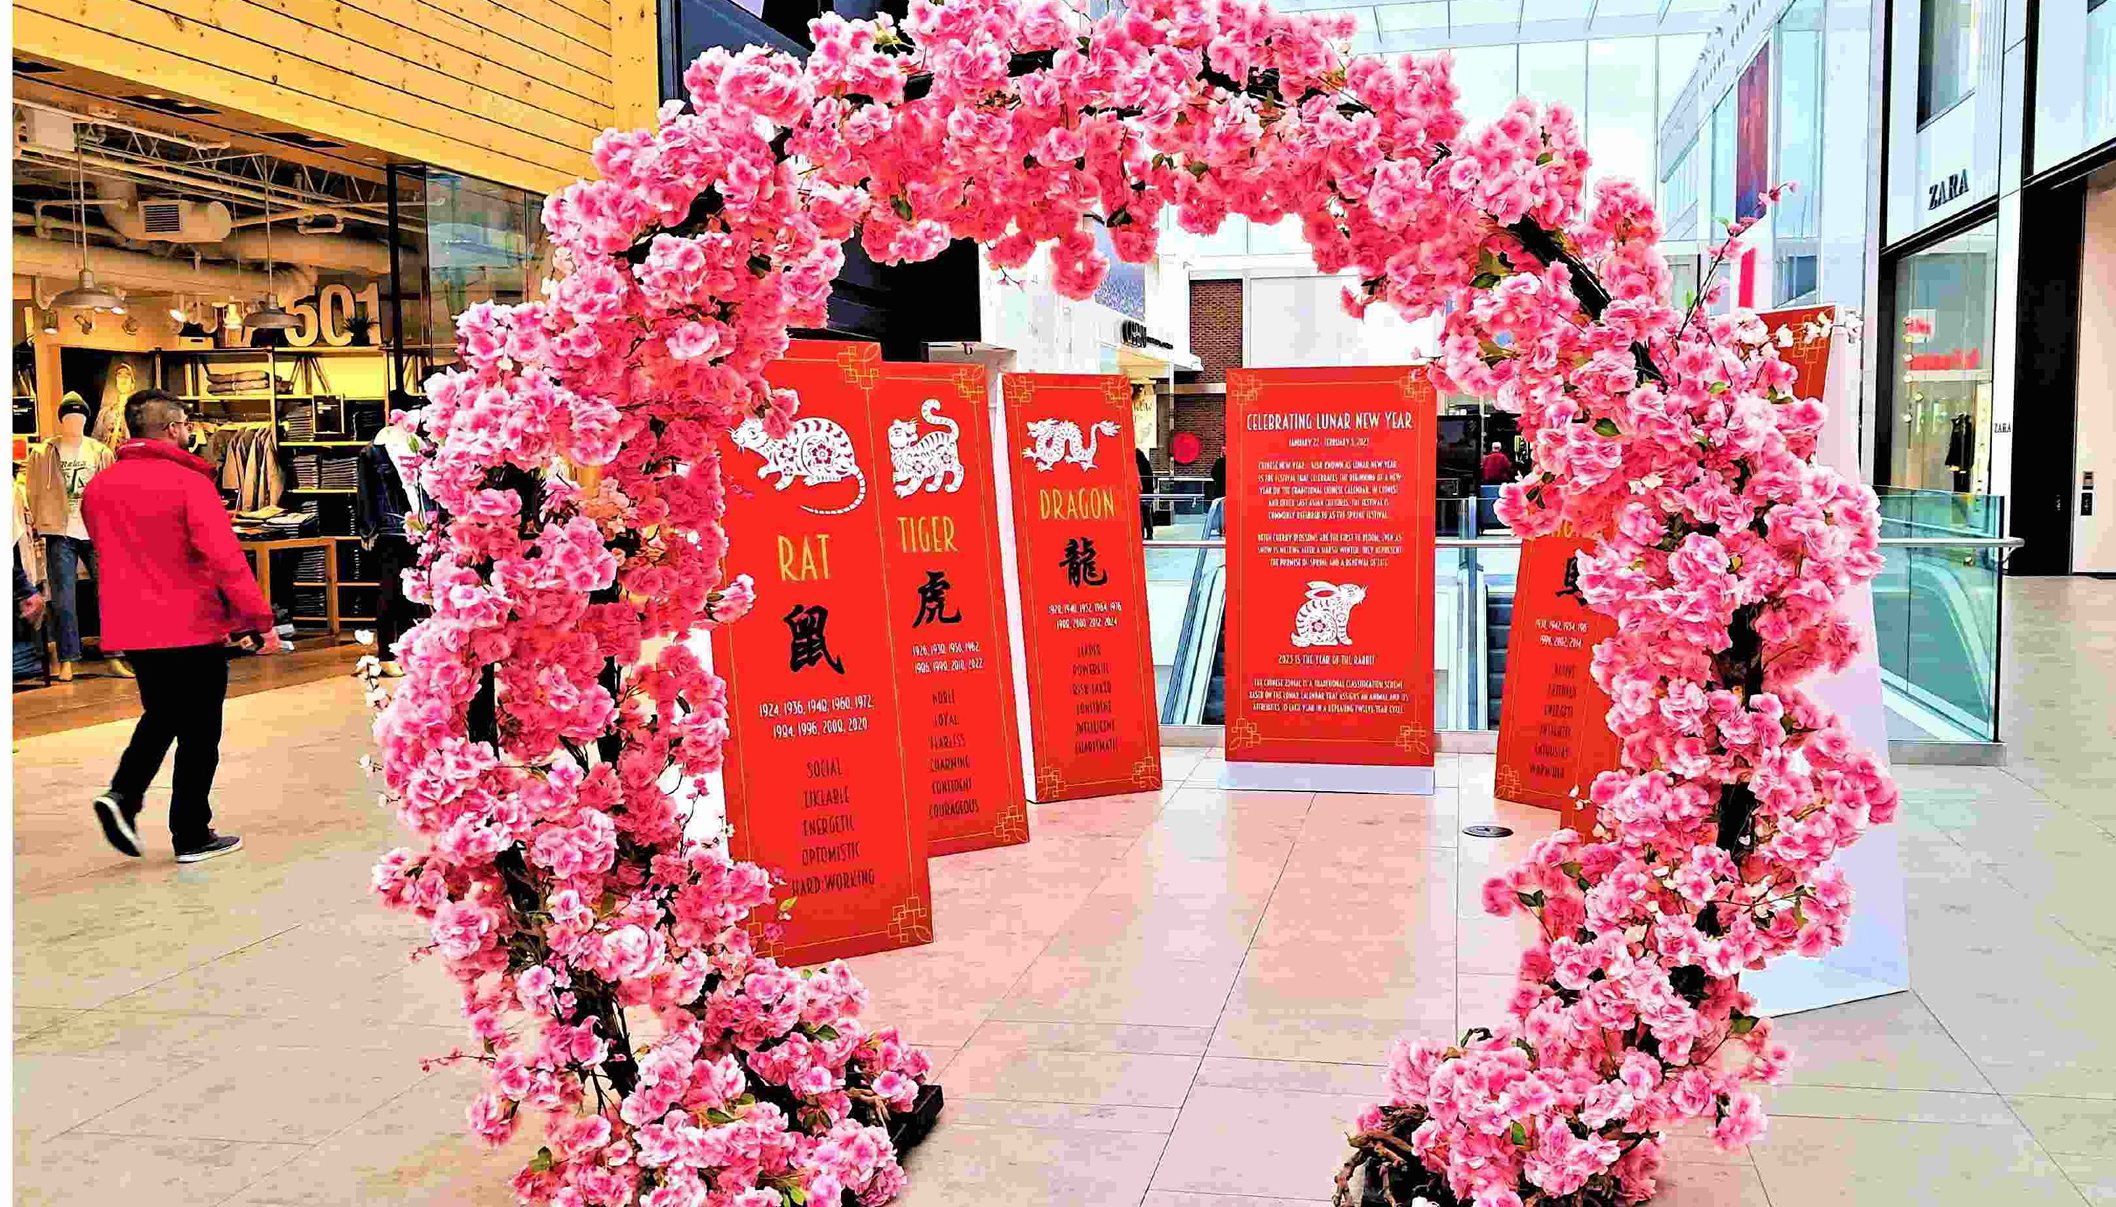 A person in a red jacket walks beside an exhibit with a flower arch and displays showing the animals from the Chinese Zodiac.